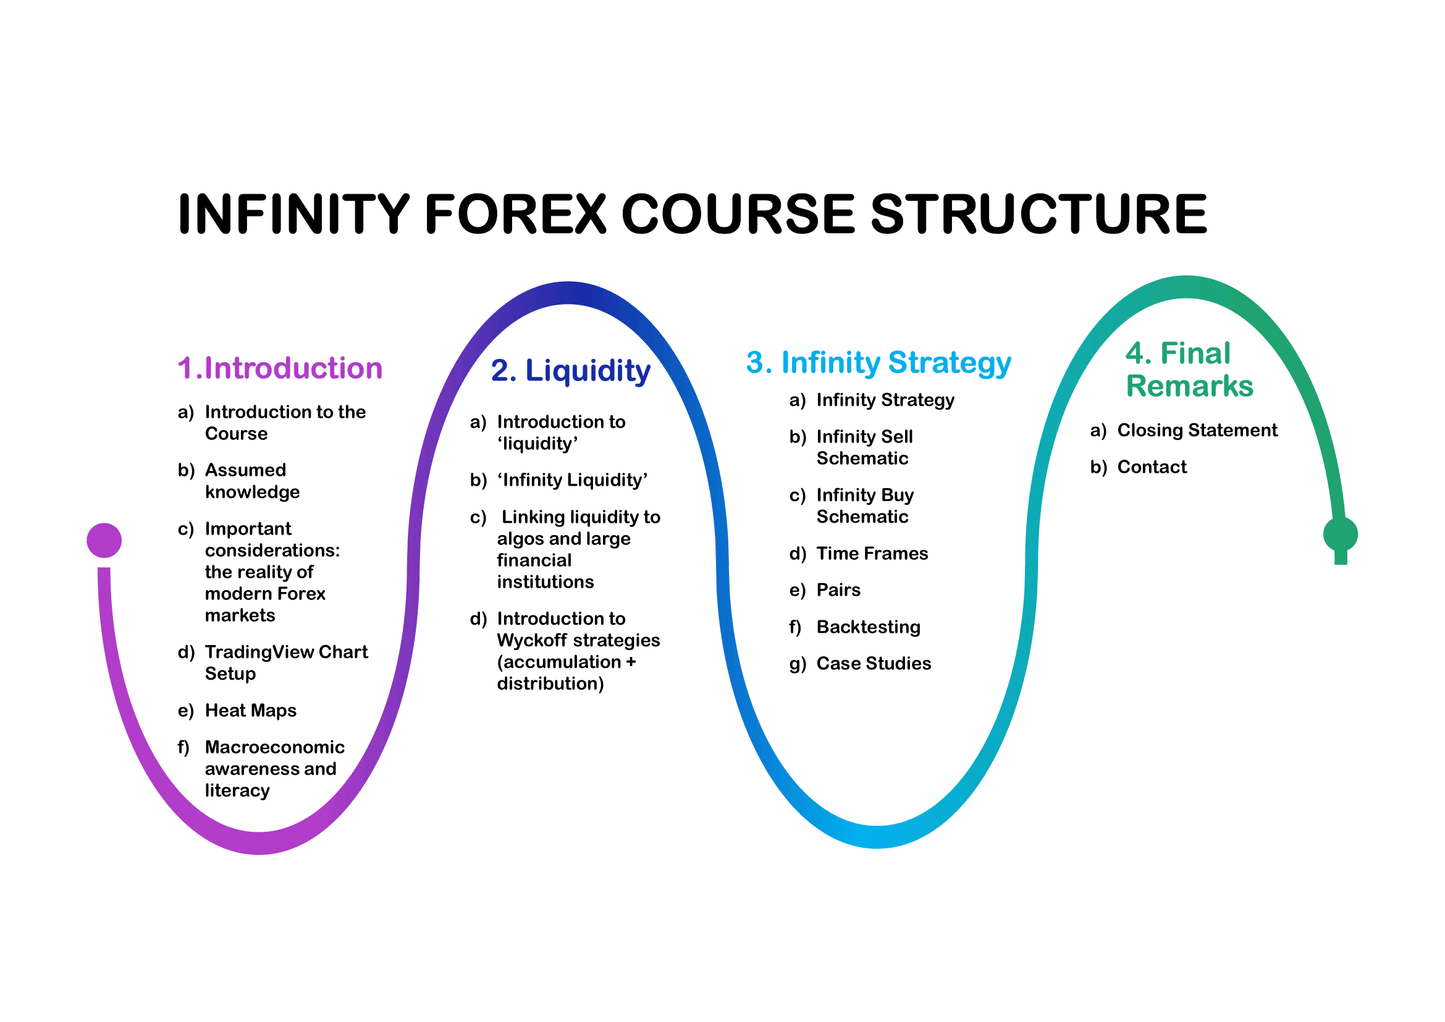 Infinity Forex Course (with Infinity Strategy!)